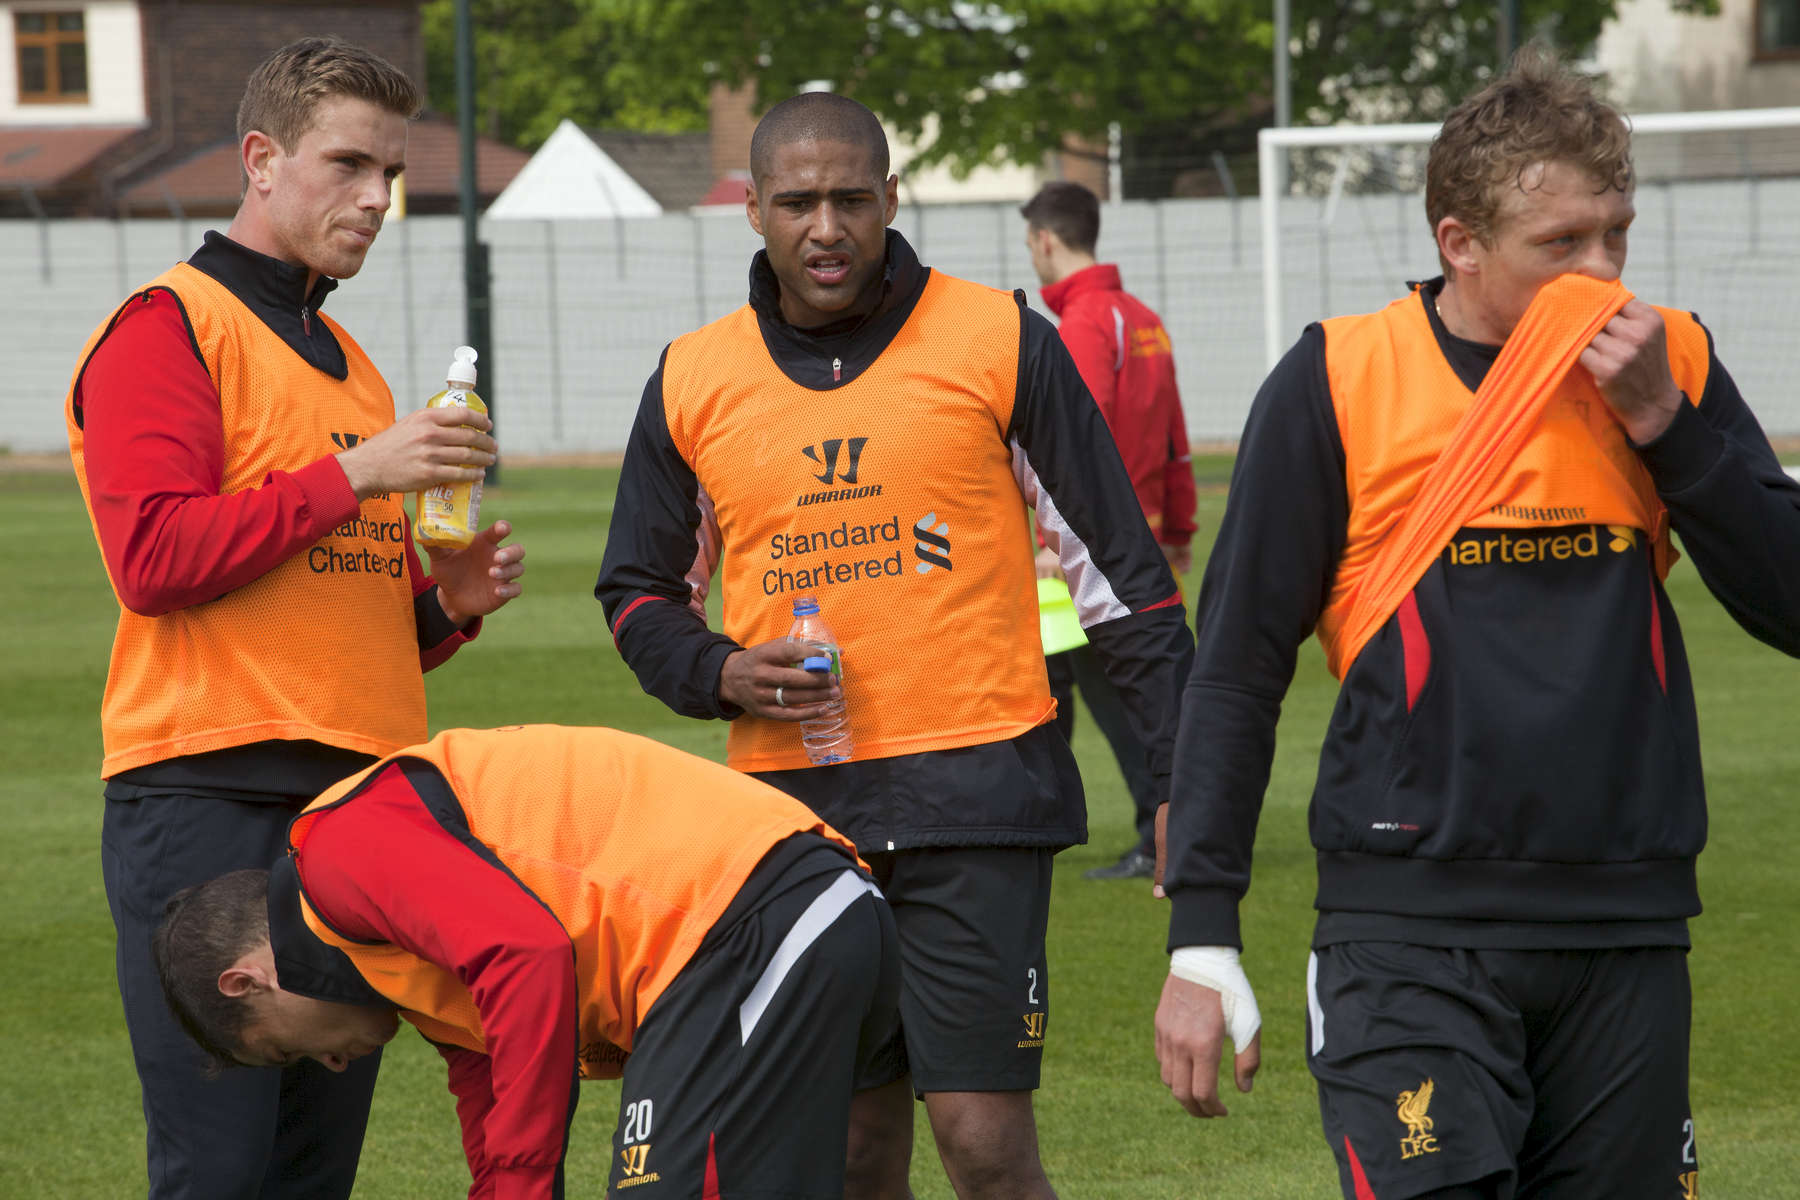 Standing from left: Liverpool FC players after training at Melwood Jordan Henderson, Glen Johnson and Lucas.Melwood is the Liverpool FC training ground, located in the West Derby area of Liverpool. It is seperate from the Liverpool Academy, which is based in Kirkby.Melwood was redeveloped in the early 2000′s with large input from then-manager Gerard Houllier and now features some of the best facilities in Europe. It has been the club’s training ground since the fifties and was previously transformed into a top class facility by Bill Shankly.Facilities include sythetic pitches, rehabilitation rooms, press and meeting rooms, gymnasium, swimming pool, restaurant and recreational facilities.